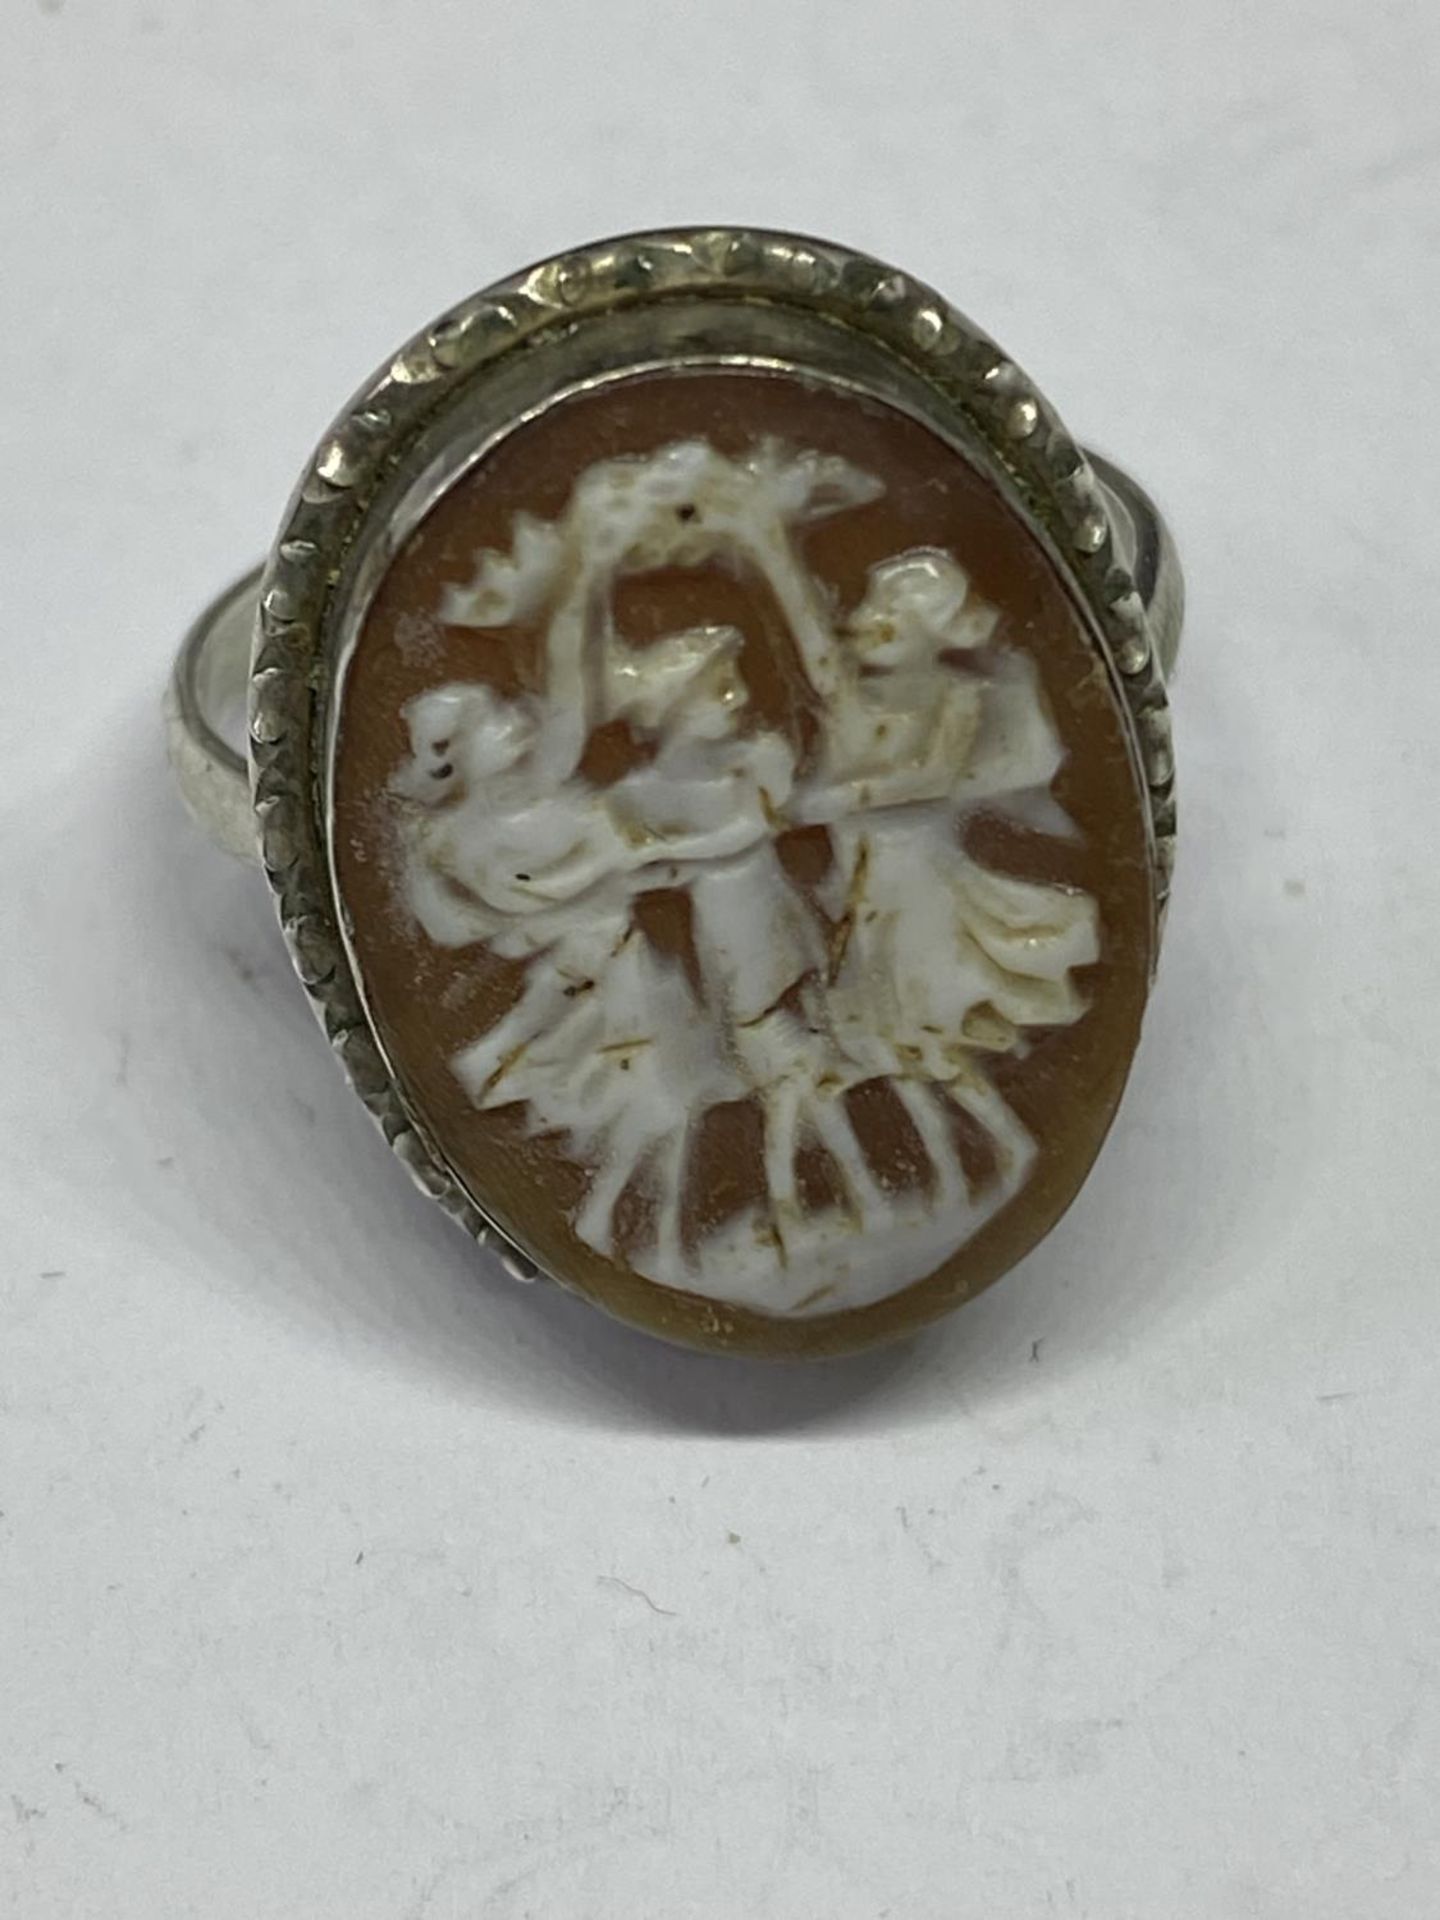 A SILVER RING WITH DANCING LADIES DESIGN IN JASPERWARE STYLE IN A PRESENTATION BOX